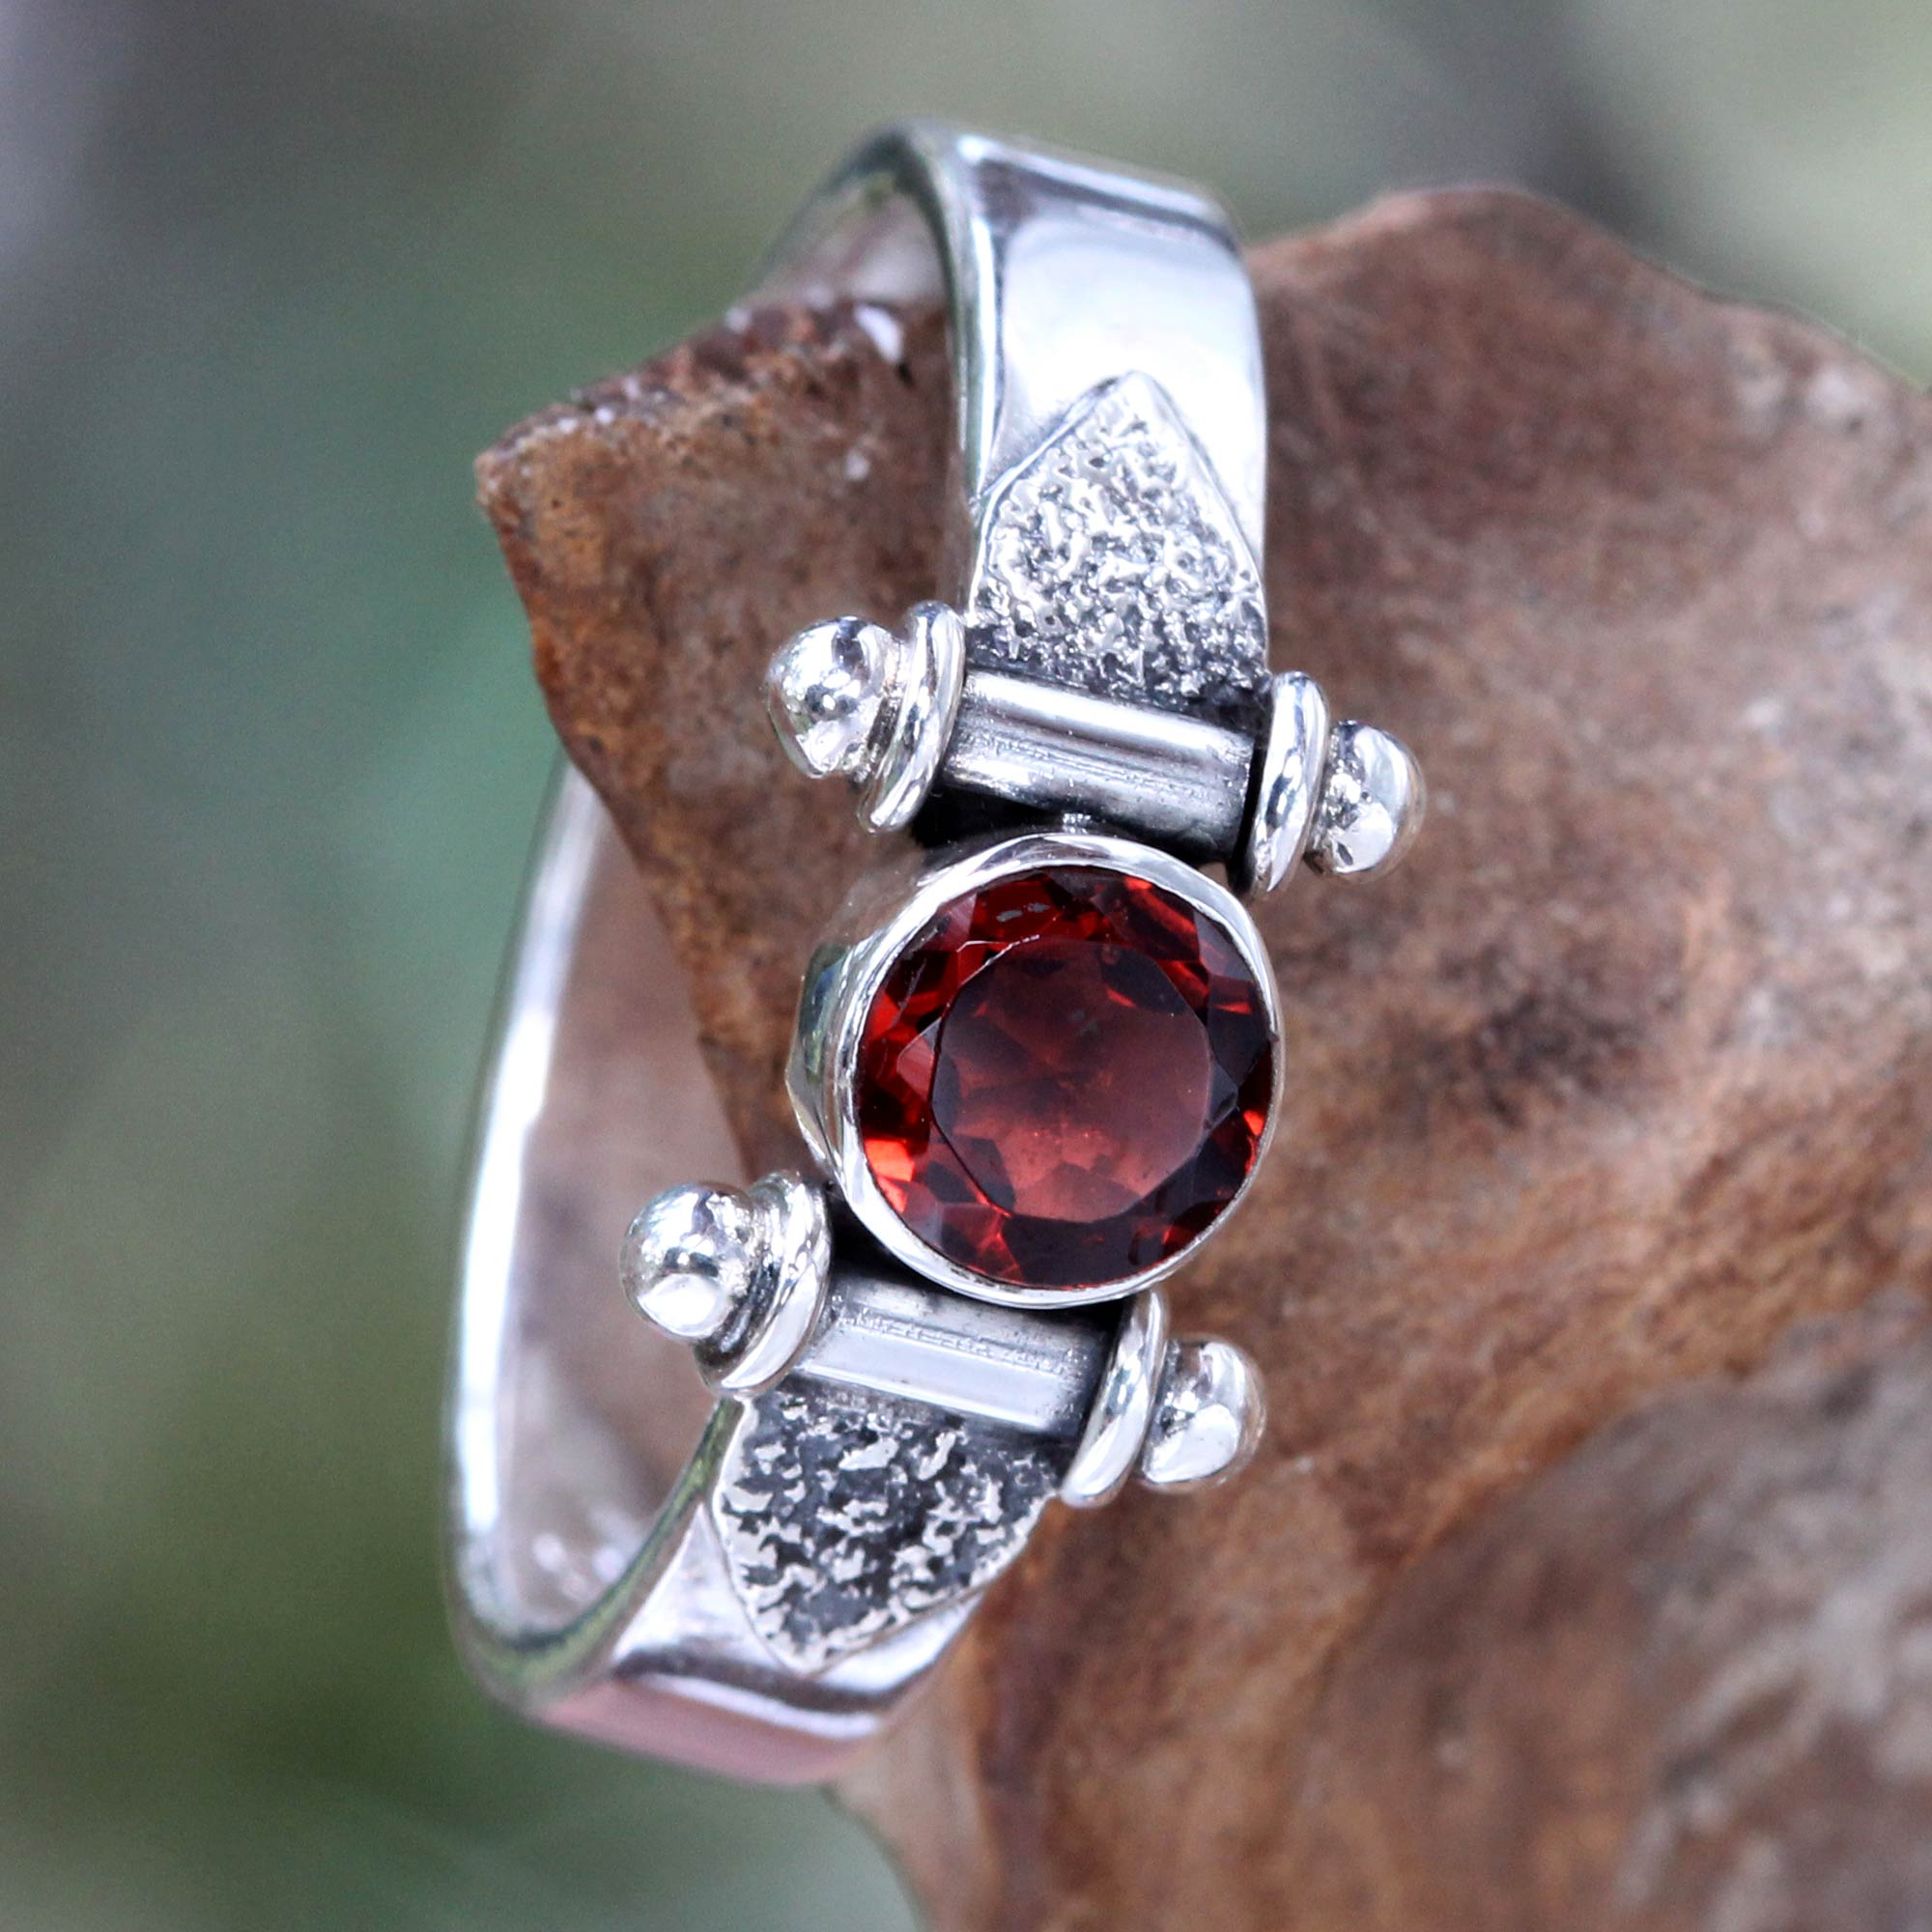 Details about   Round Cut Garnet 925 Sterling Silver & Three Stone Cocktail Ring 